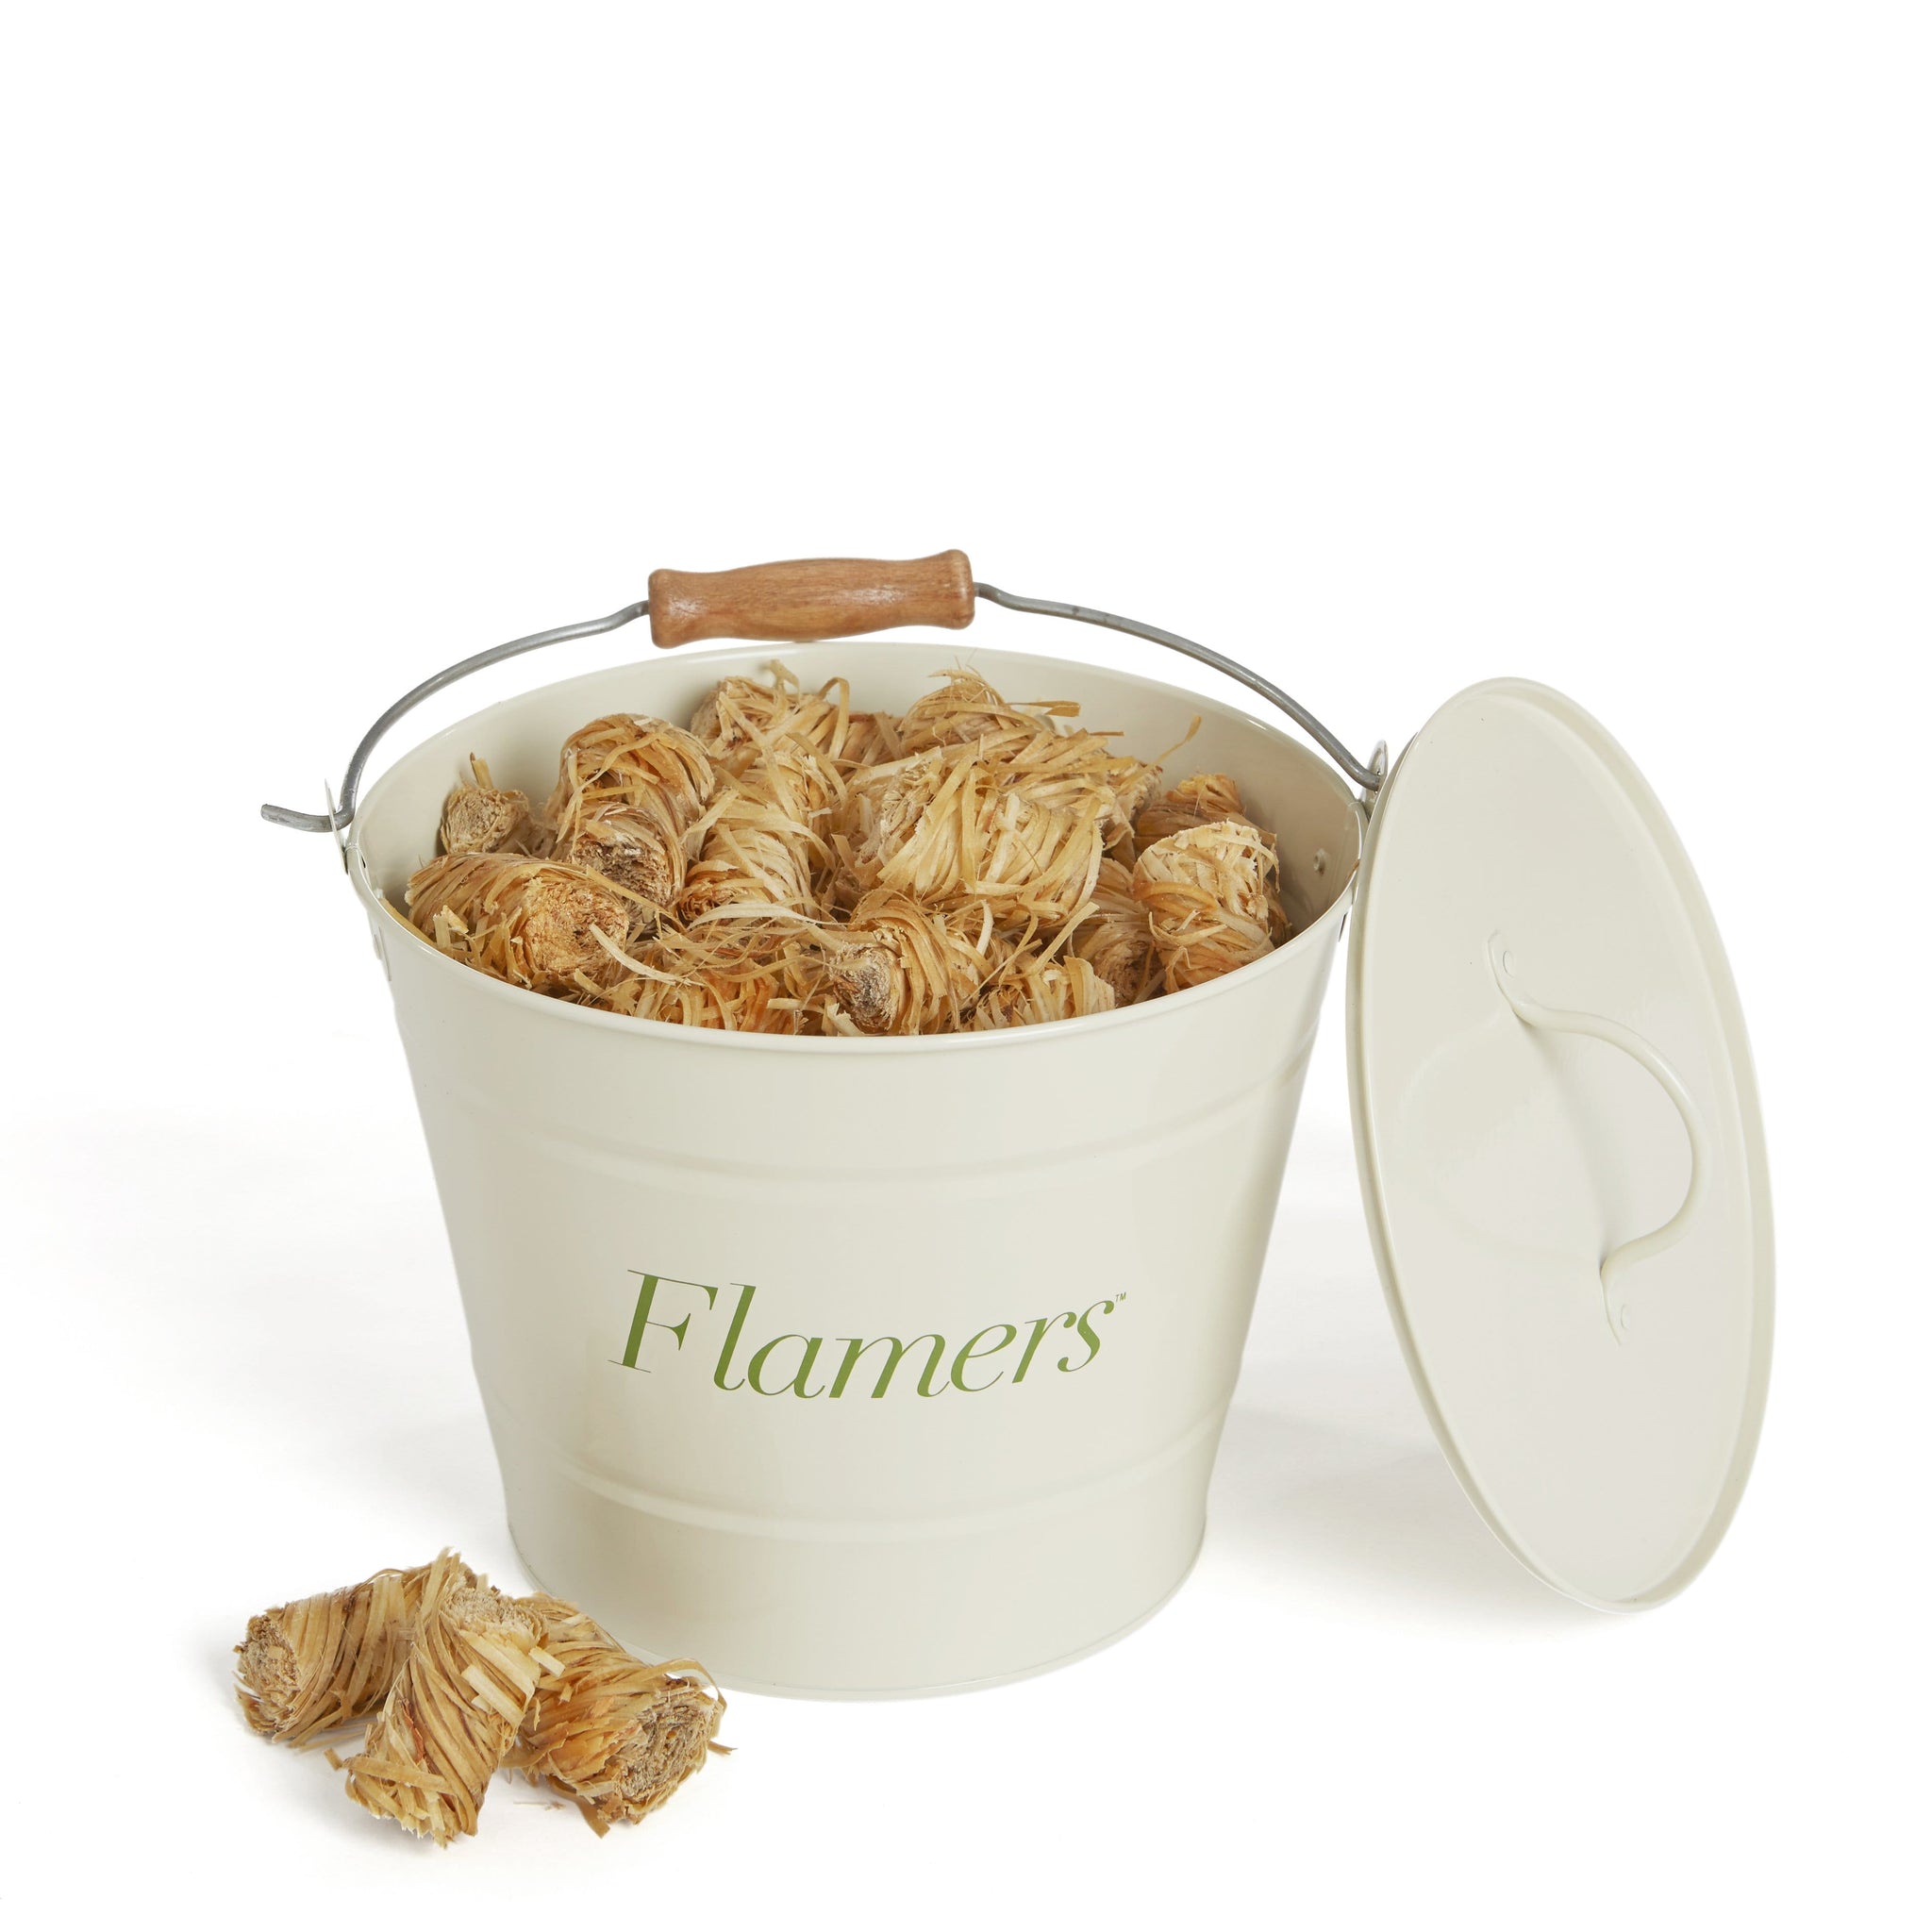 Flamers-Bucket-Full-of-Flamers-natural-firelighters-fireplace-accessory